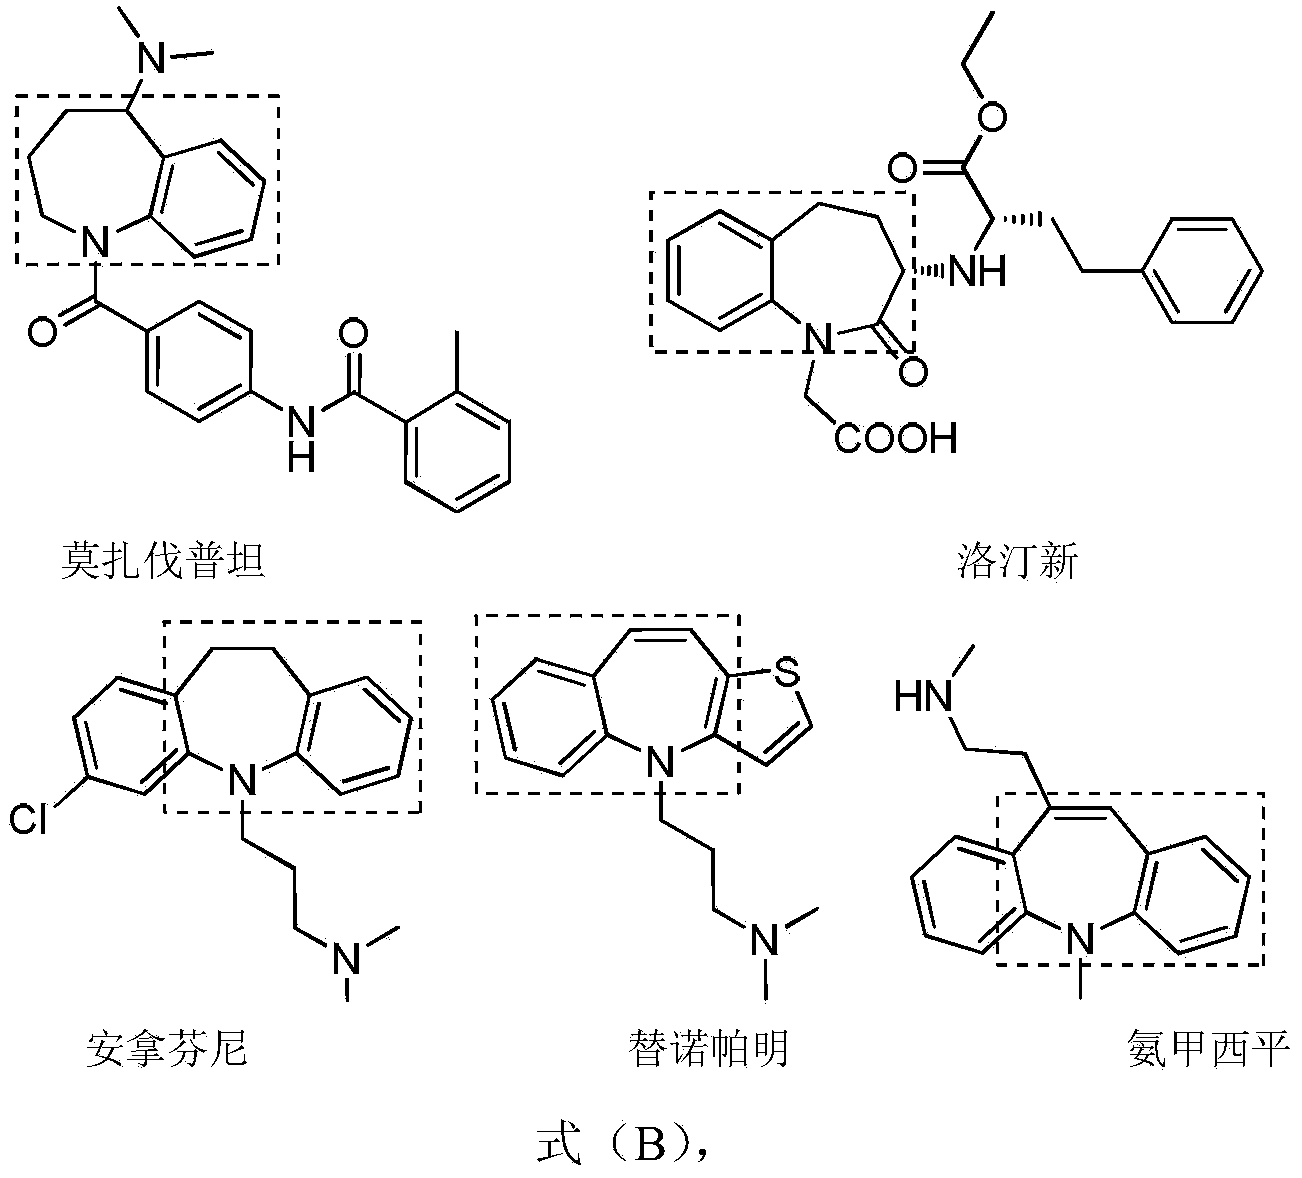 Method for synthesis of 1,2,3,4,5,9-substituted benzazepine compound